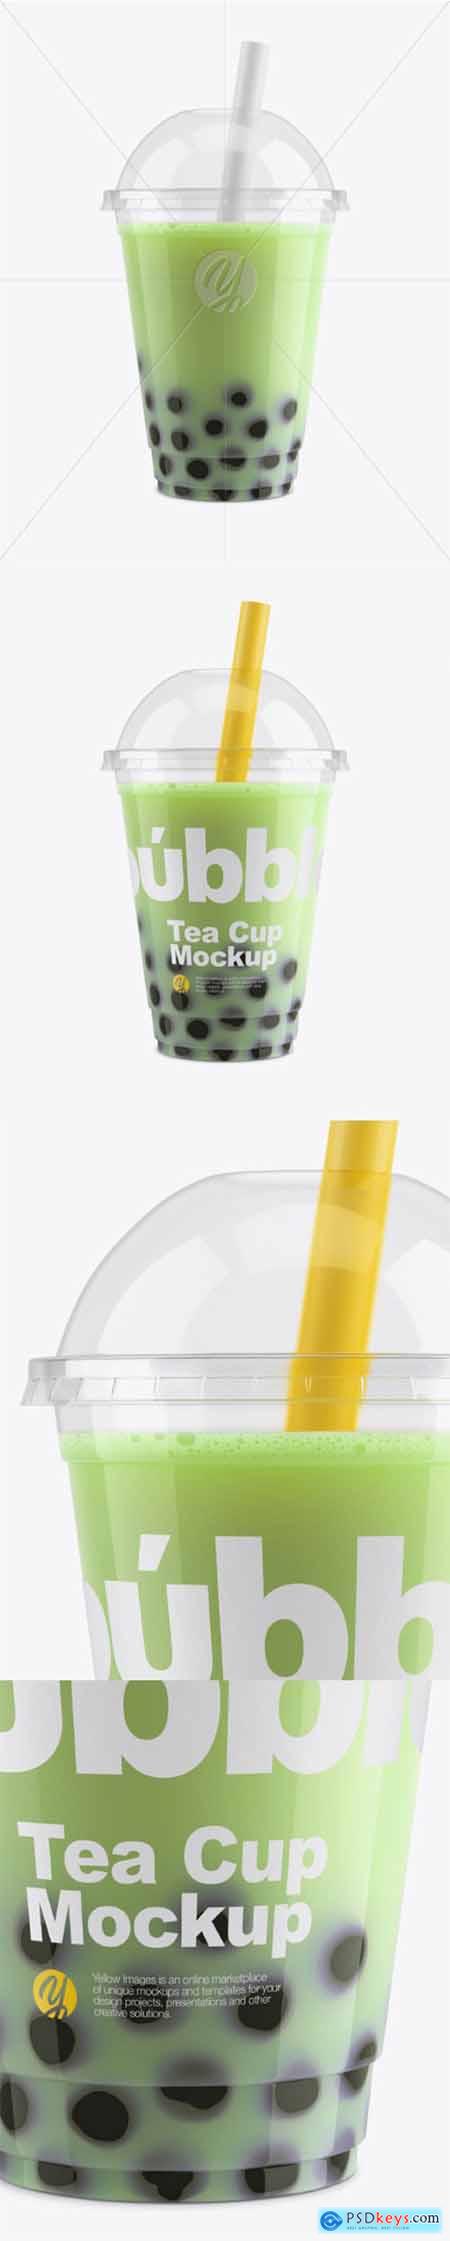 Bubble Tea Cup Mockup Front View Free Download Photoshop Vector Stock Image Via Torrent Zippyshare From Psdkeys Com